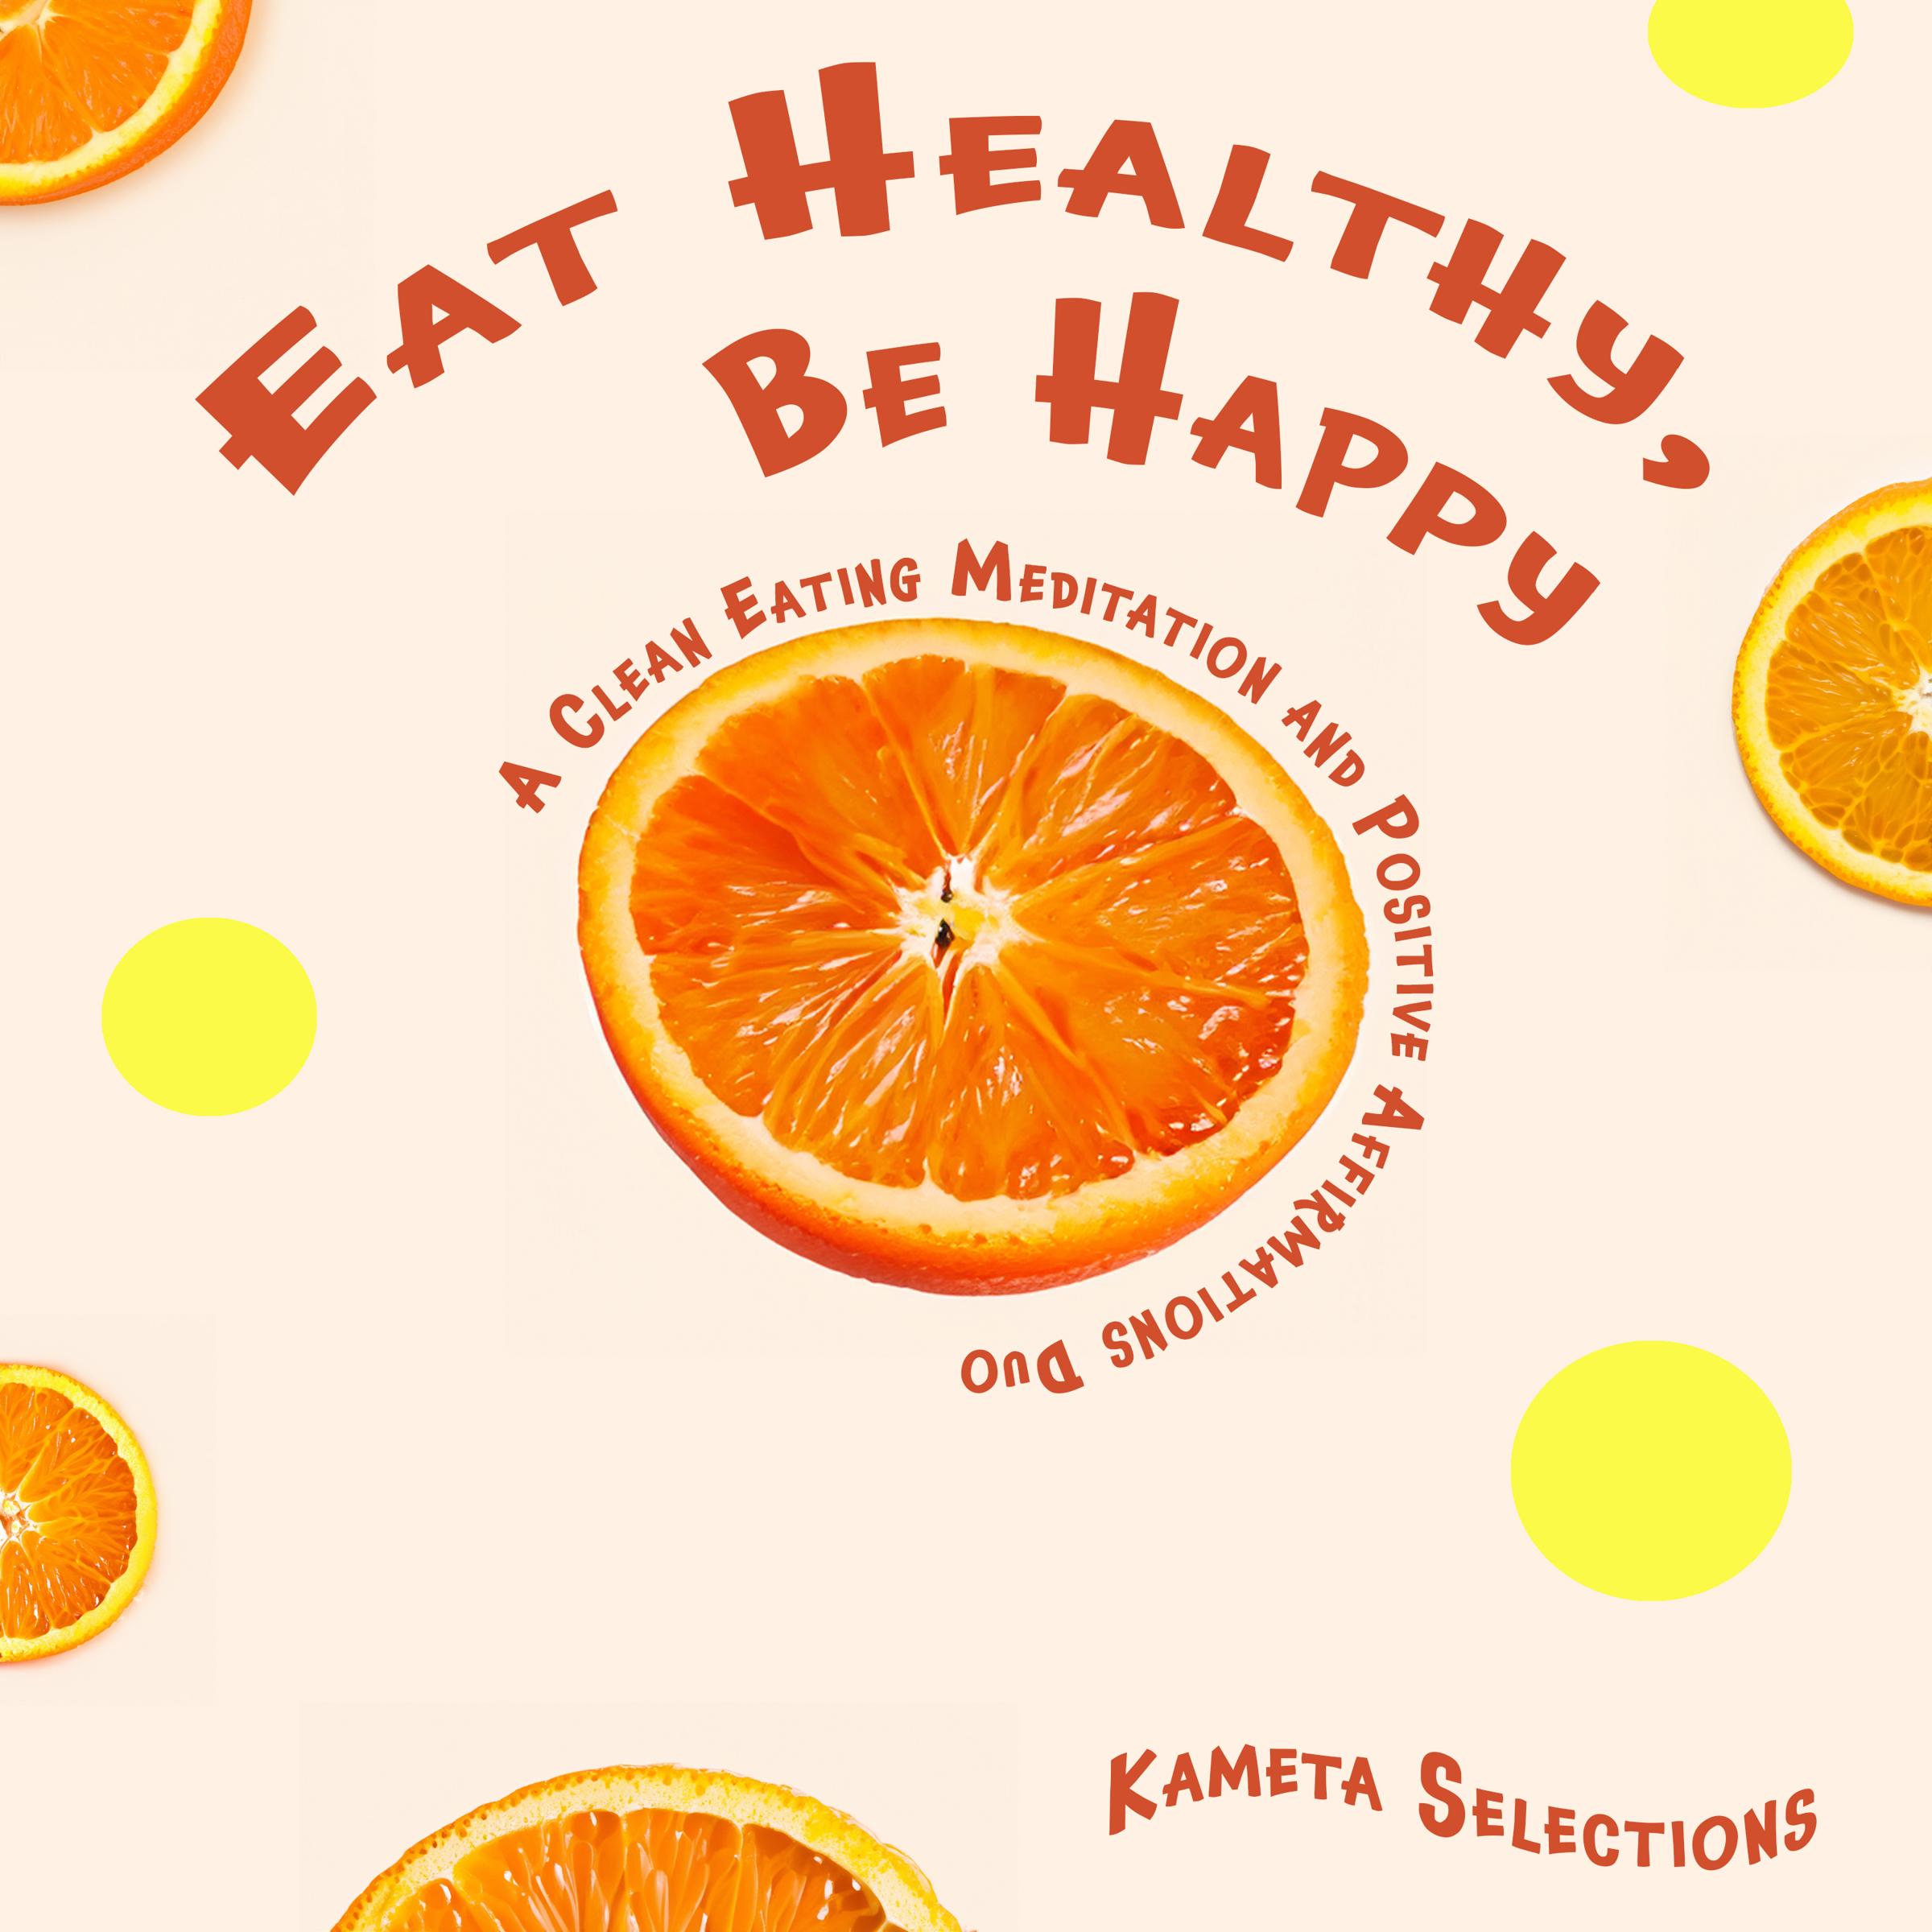 Eat Healthy, Be Happy: A Clean Eating Meditation and Positive Affirmations Duo